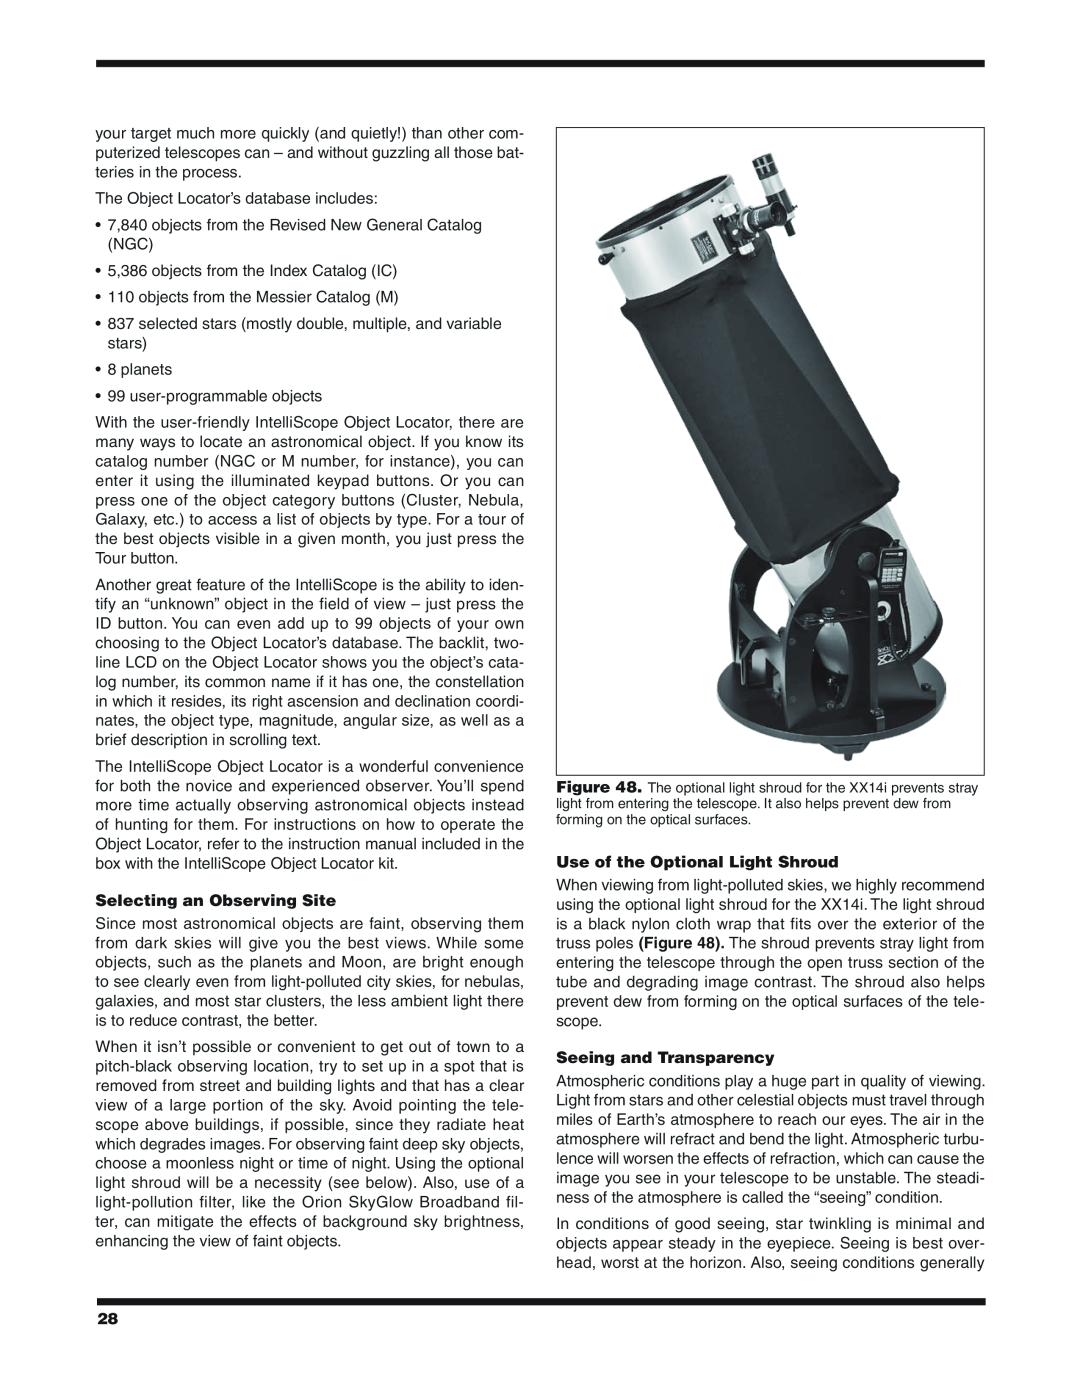 Orion 9791 instruction manual Selecting an Observing Site, Use of the Optional Light Shroud, Seeing and Transparency 